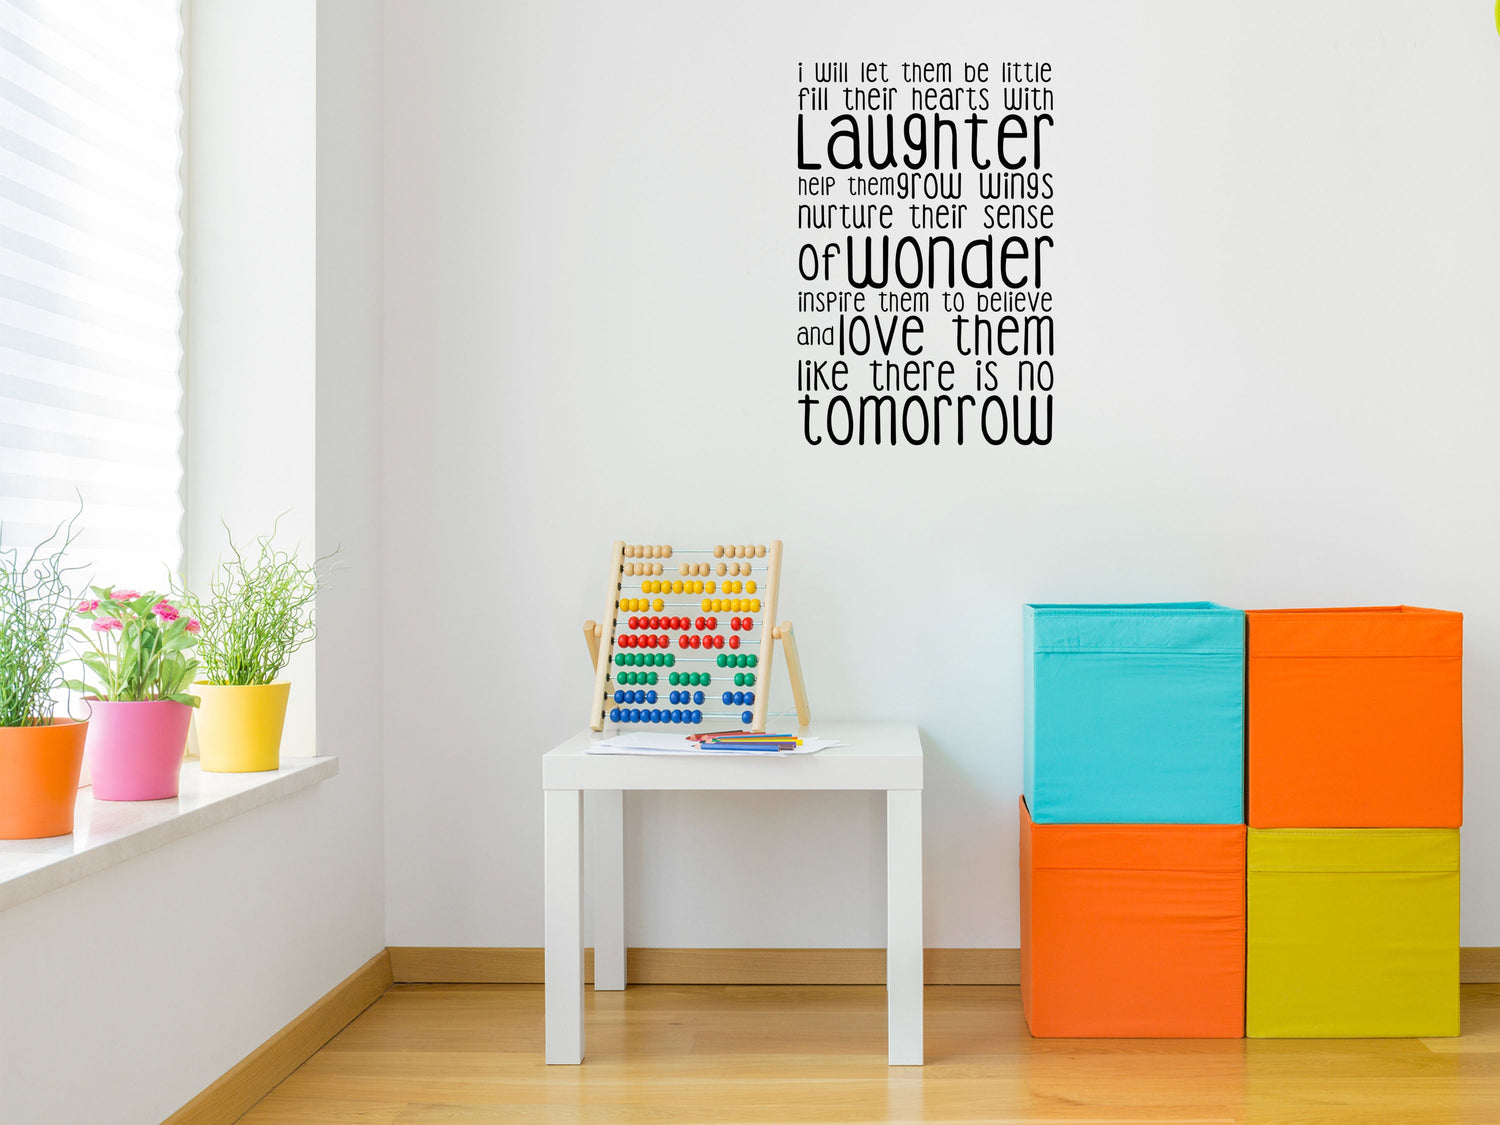 I Will Let Them Be Little - Inspirational Wall Decals Vinyl Wall Decal Inspirational Wall Signs 